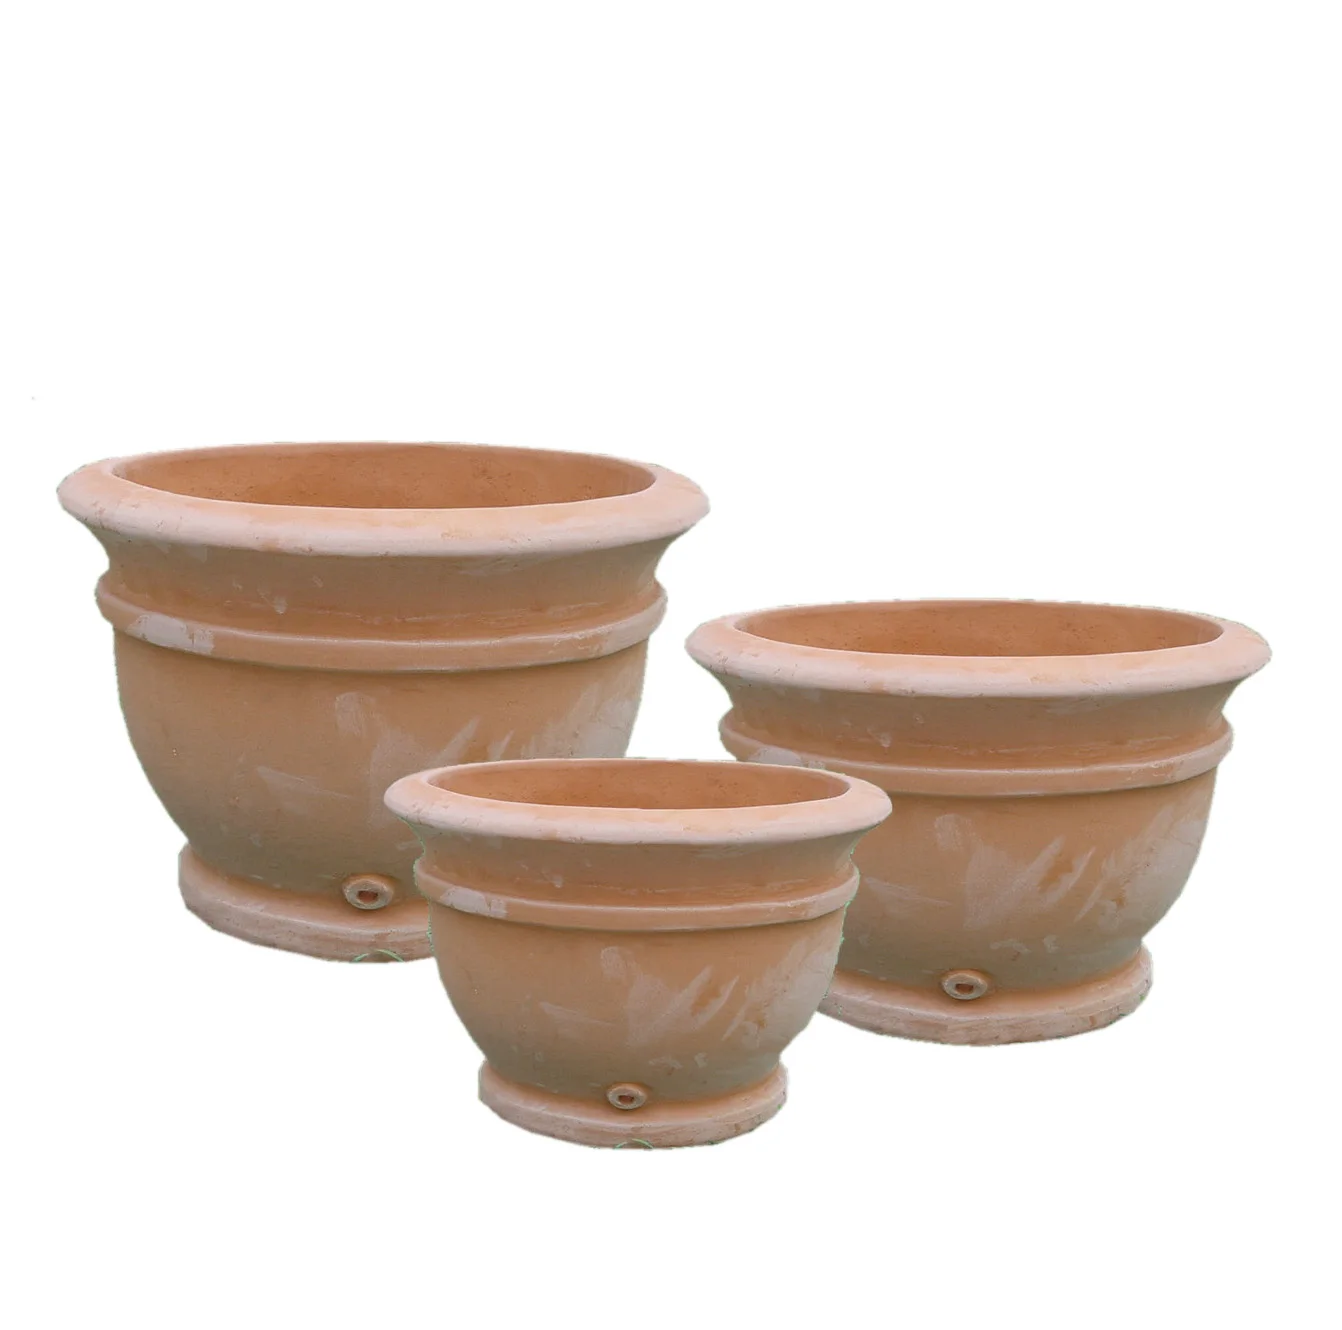 Wholesale Terracotta Flower Pots Kit Europe Design Style Pottery Planter for Home Nursery Room Floor or Shopping Mall Use